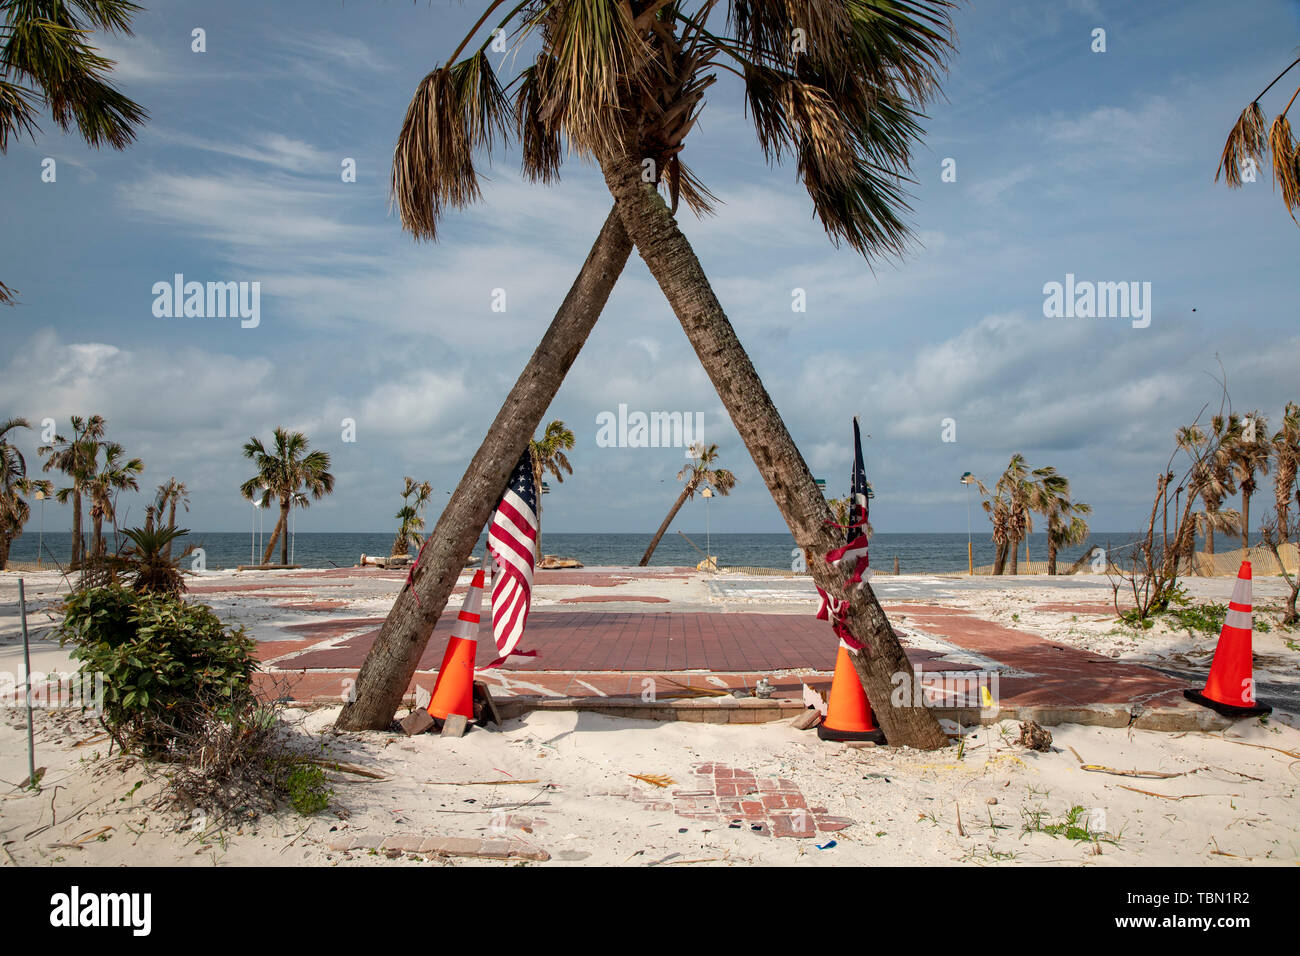 Mexico Beach, Florida - Destruction from Hurricane Michael is widespread seven months after the Category 5 storm hit the Florida Panhandle. Palm trees Stock Photo